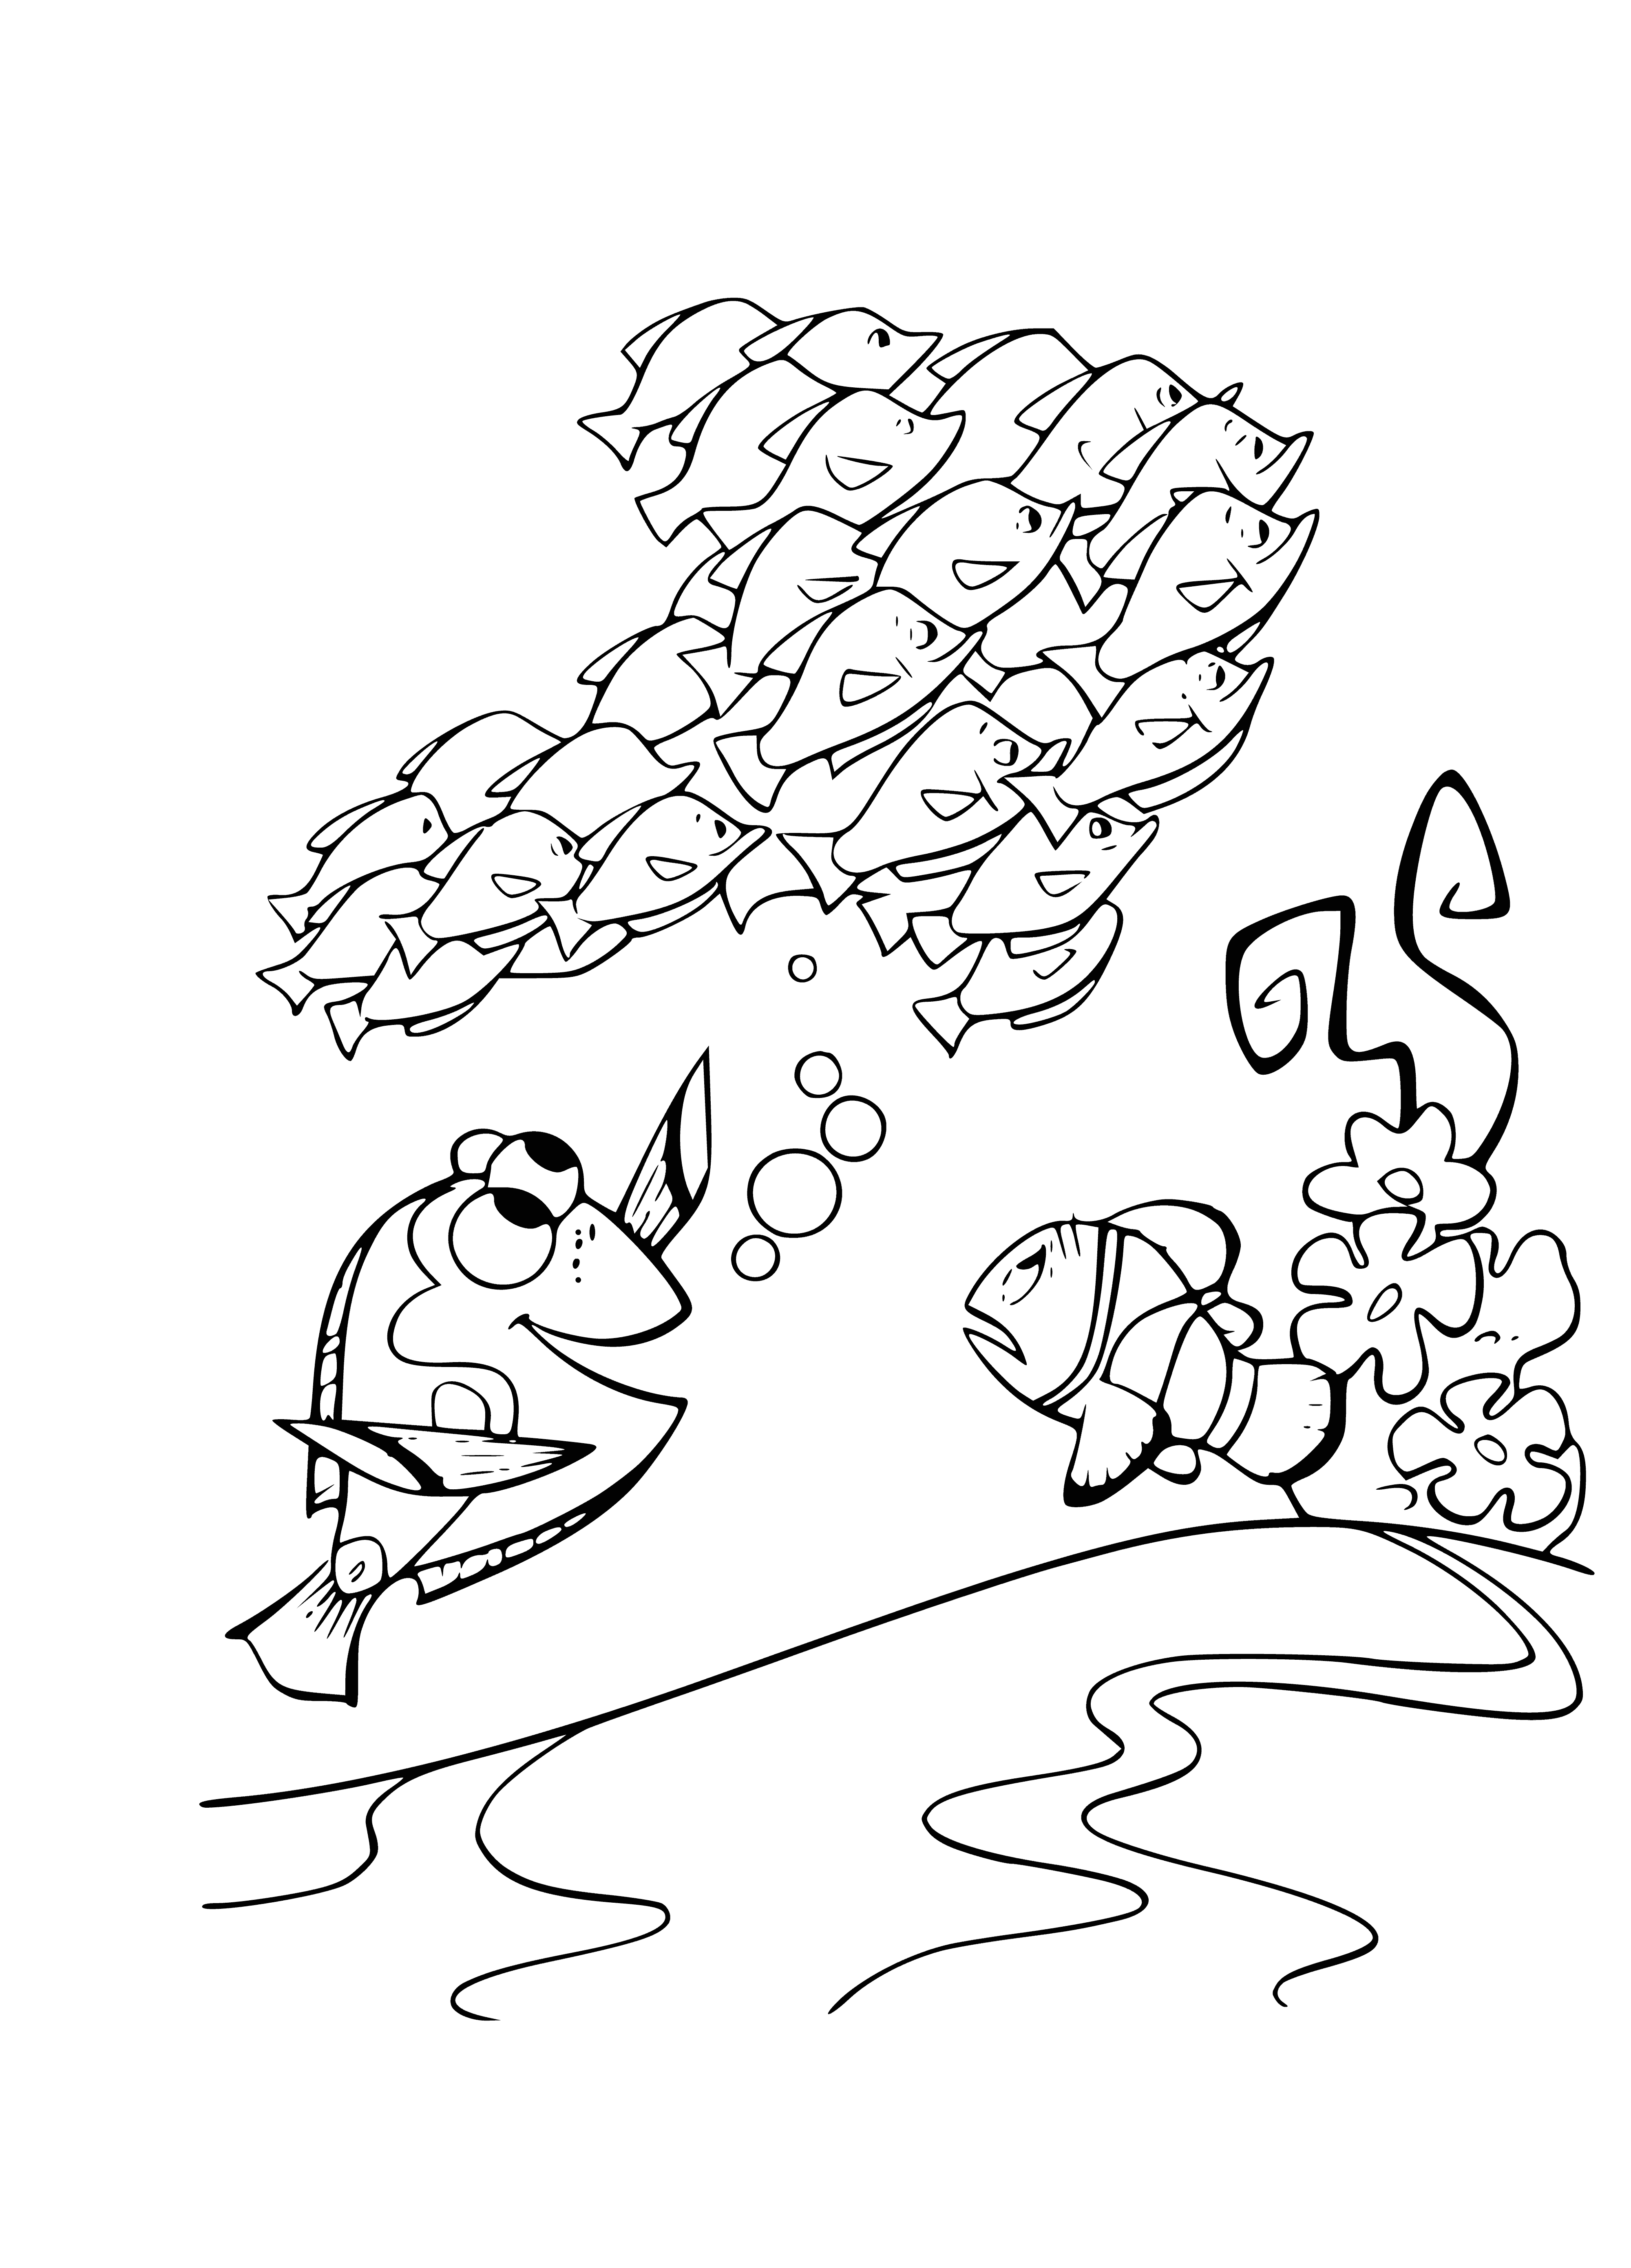 coloring page: Clownfish with orange and white stripes seen in anemone; white belly and a blue & white striped fish in background.